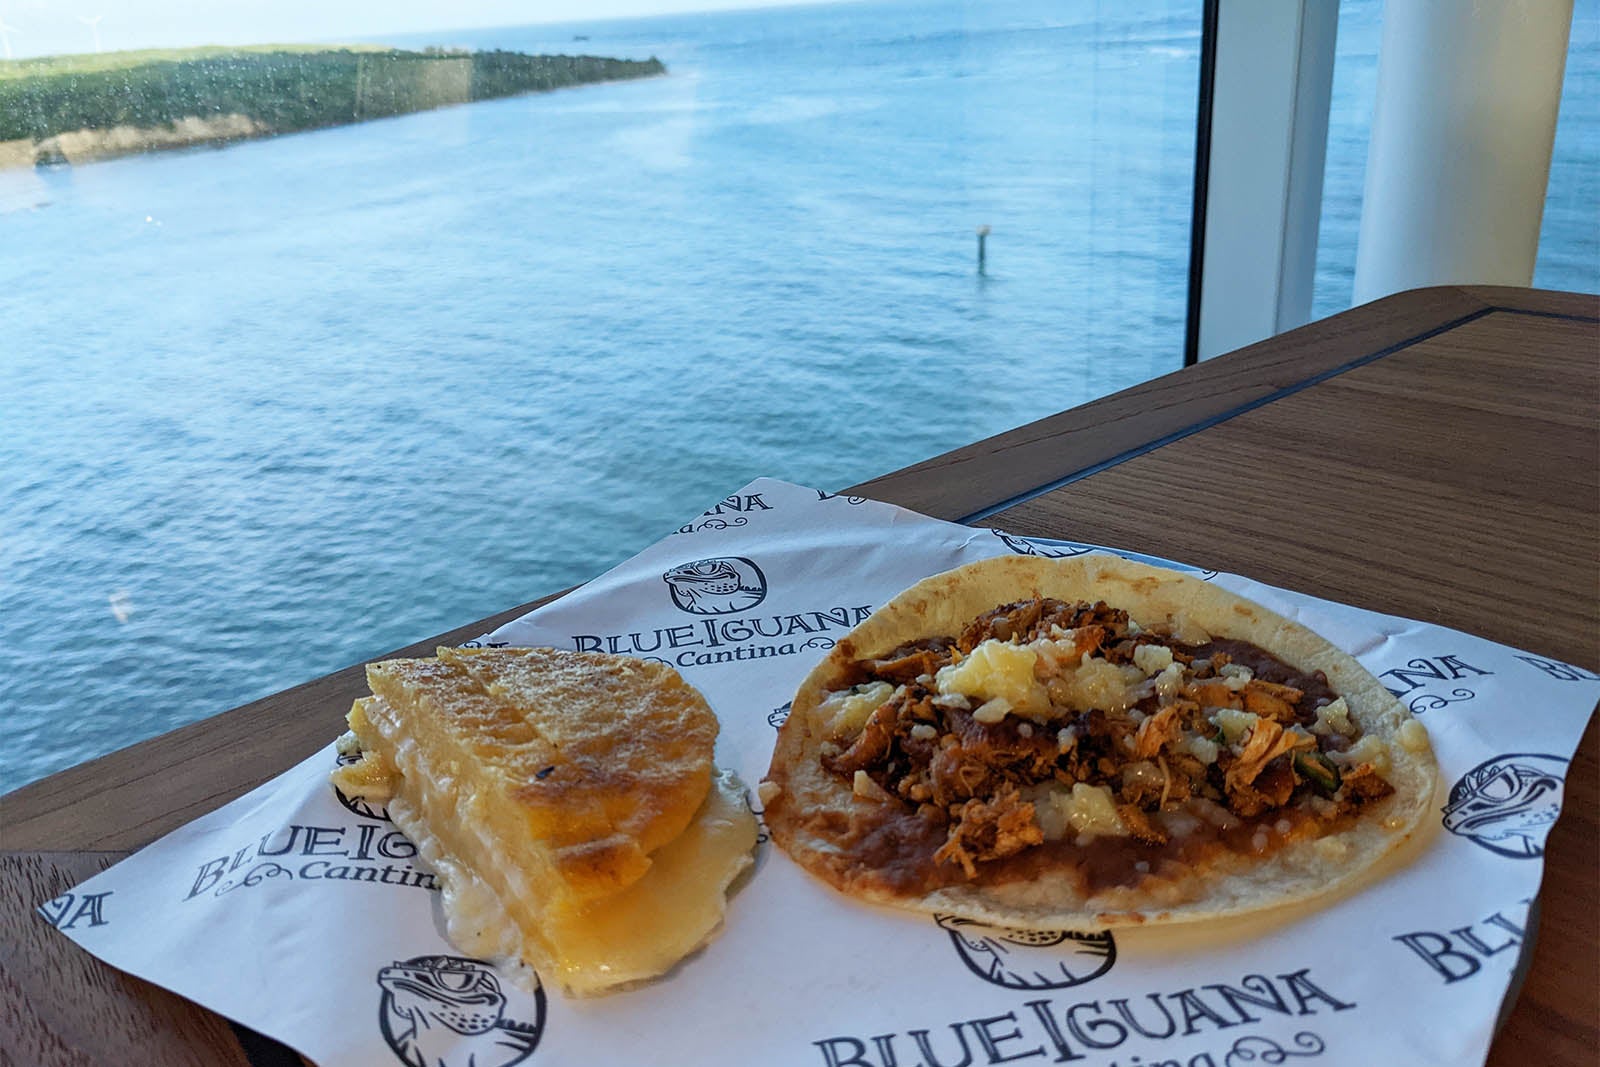 Breakfast of taco and arepa on cruise ship by window overlooking the ocean